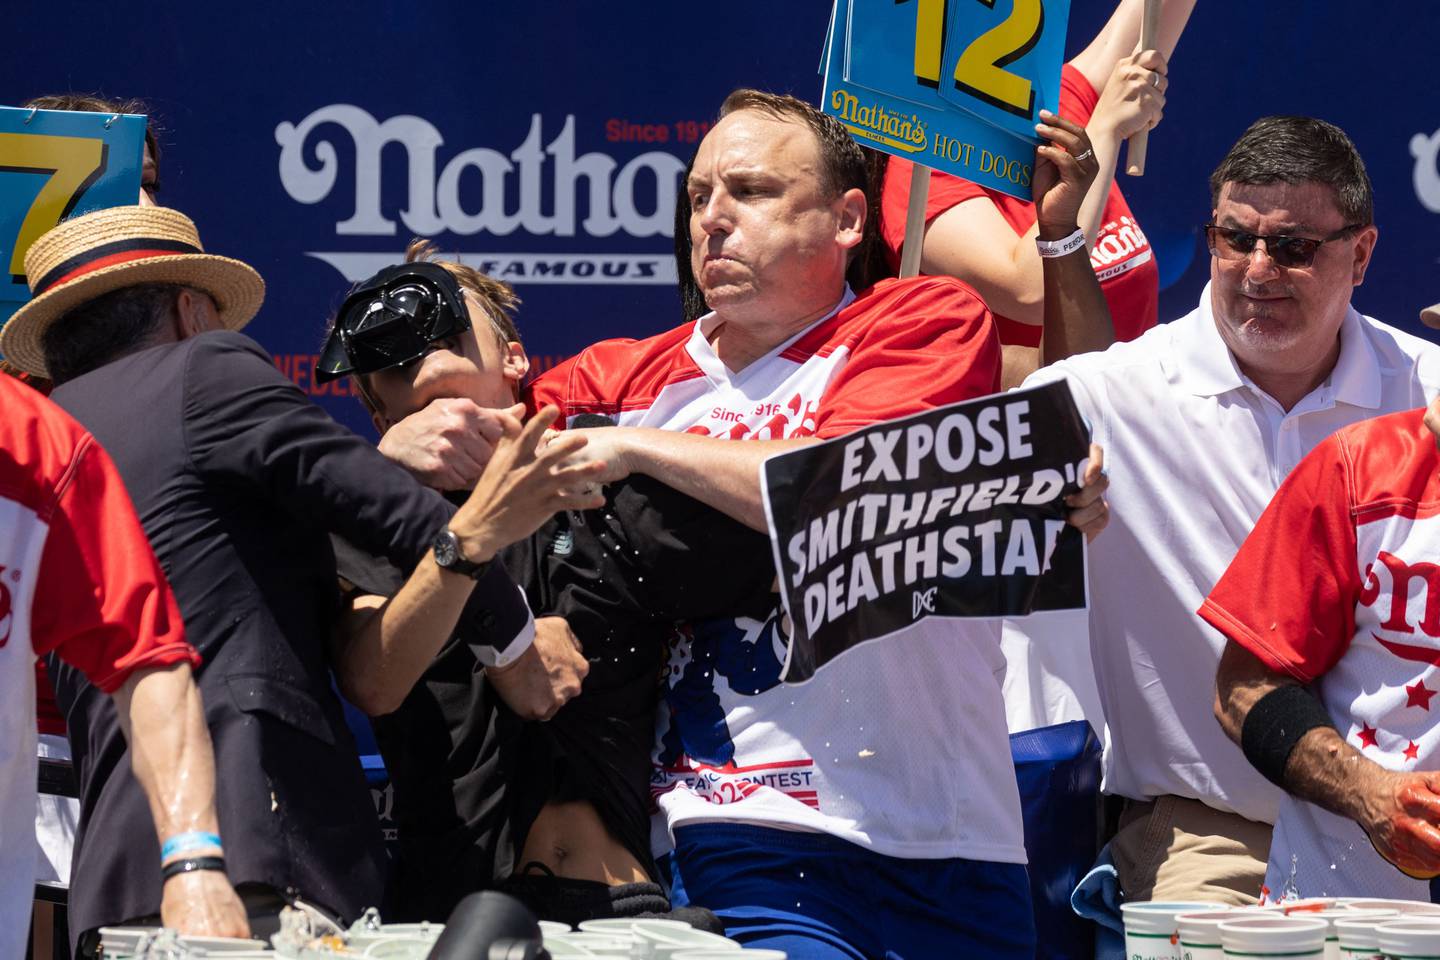 Joey Chestnut tackles a protester who interrupted the competition during the 2022 Nathan's Famous Fourth of July hot dog eating contest on Coney Island, New York. AFP